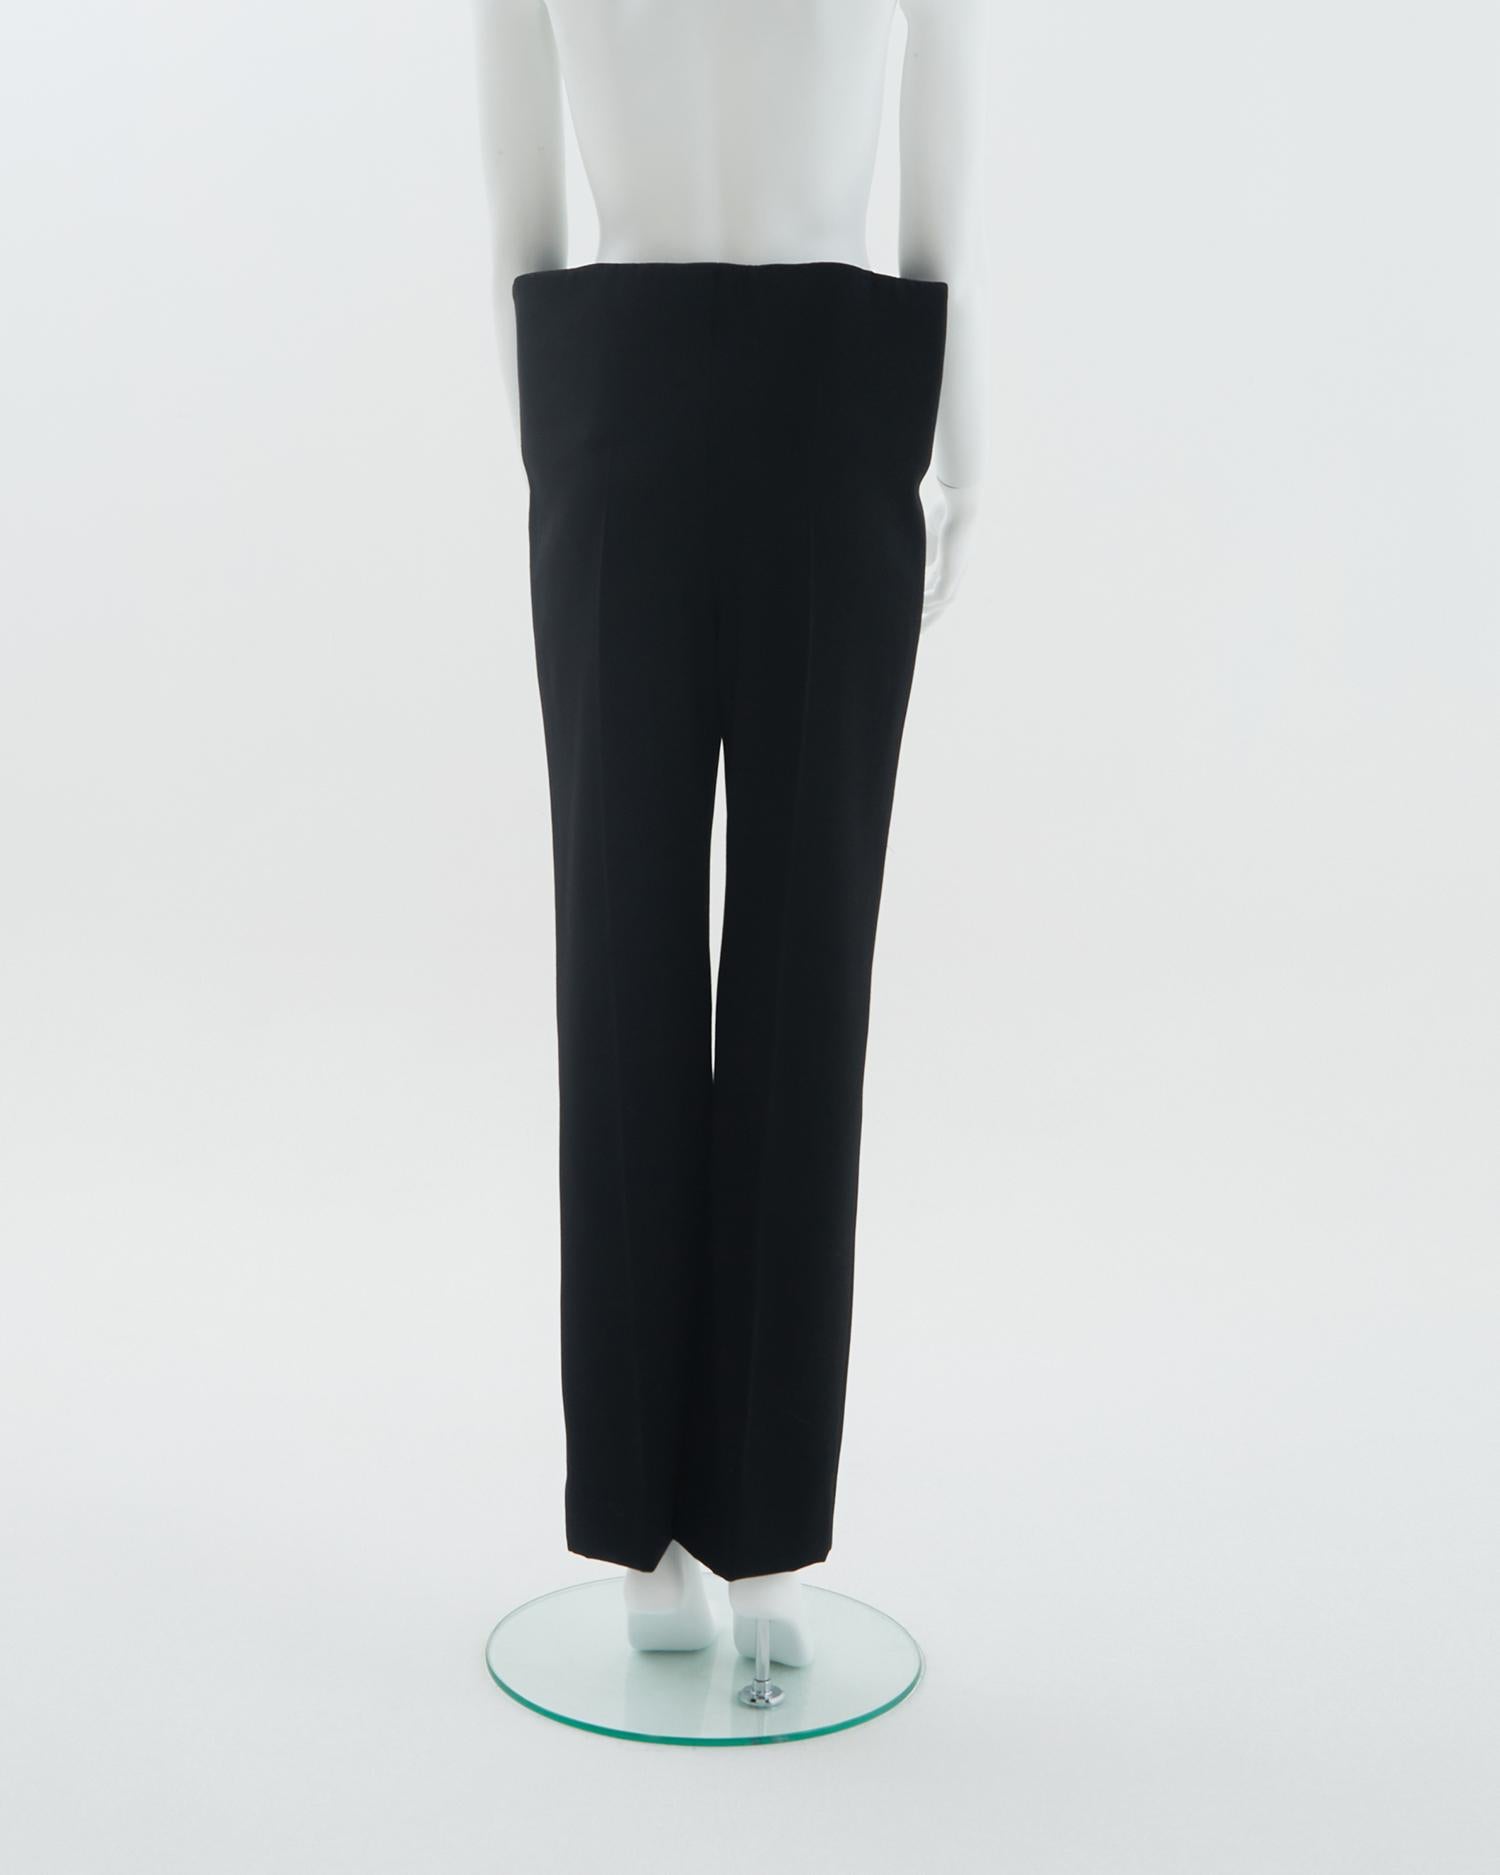 Maison Martin Margiela F/W 2010 black wide pants In Excellent Condition For Sale In Milano, IT